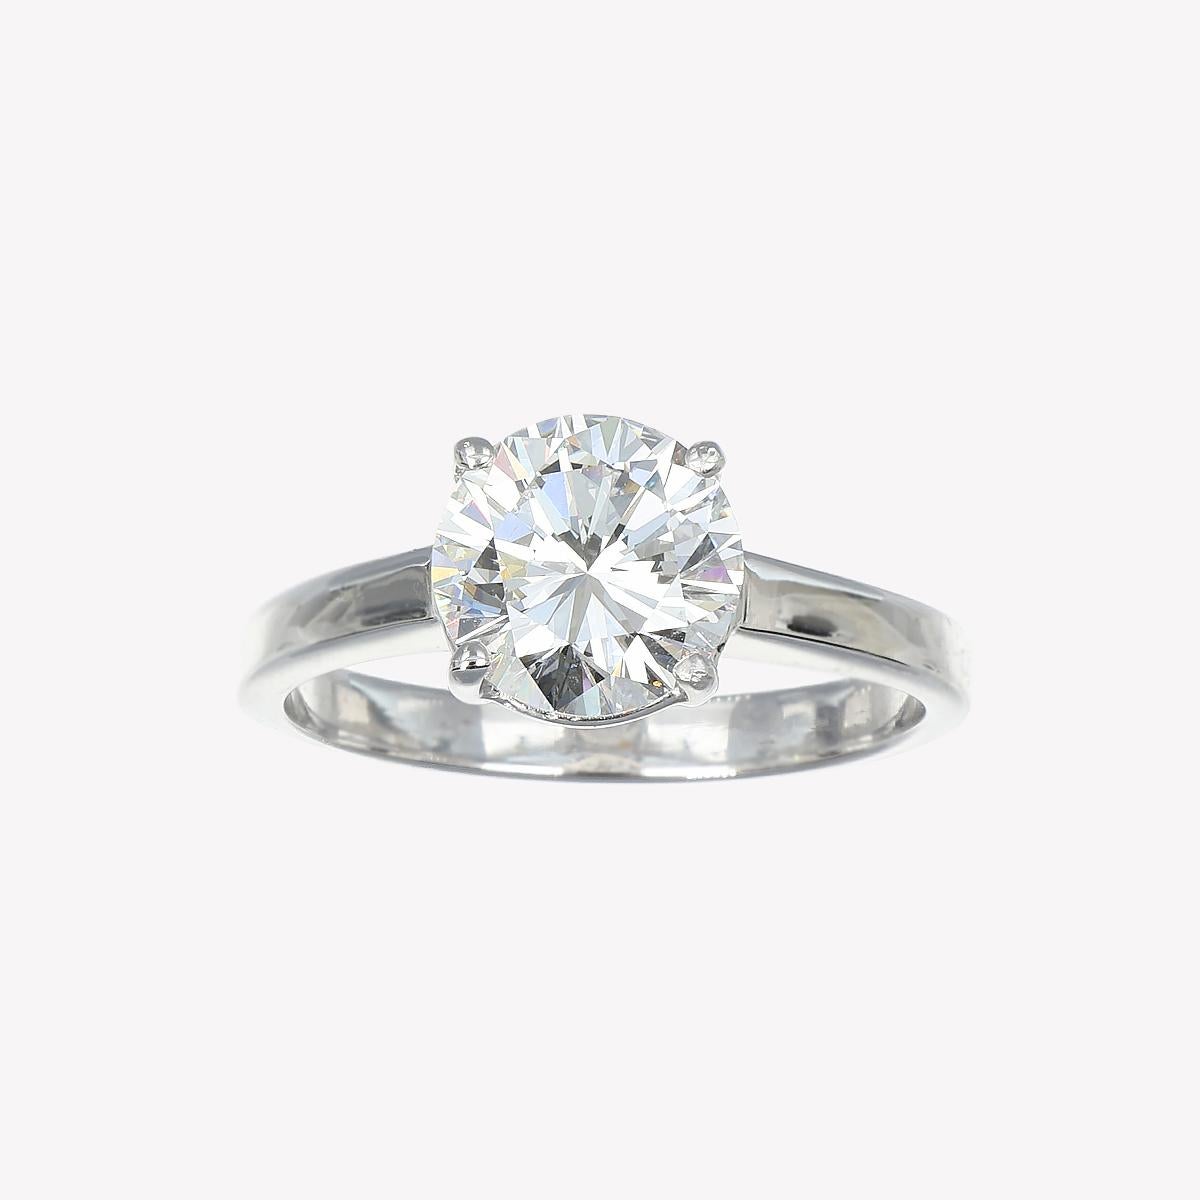 The essence of perfection and eternal promise is crystallized in this solitaire ring, where the brilliant-cut diamond stands as the undisputed centerpiece. It radiates pure and untainted light, a rare D color that symbolizes the dawn's first light.